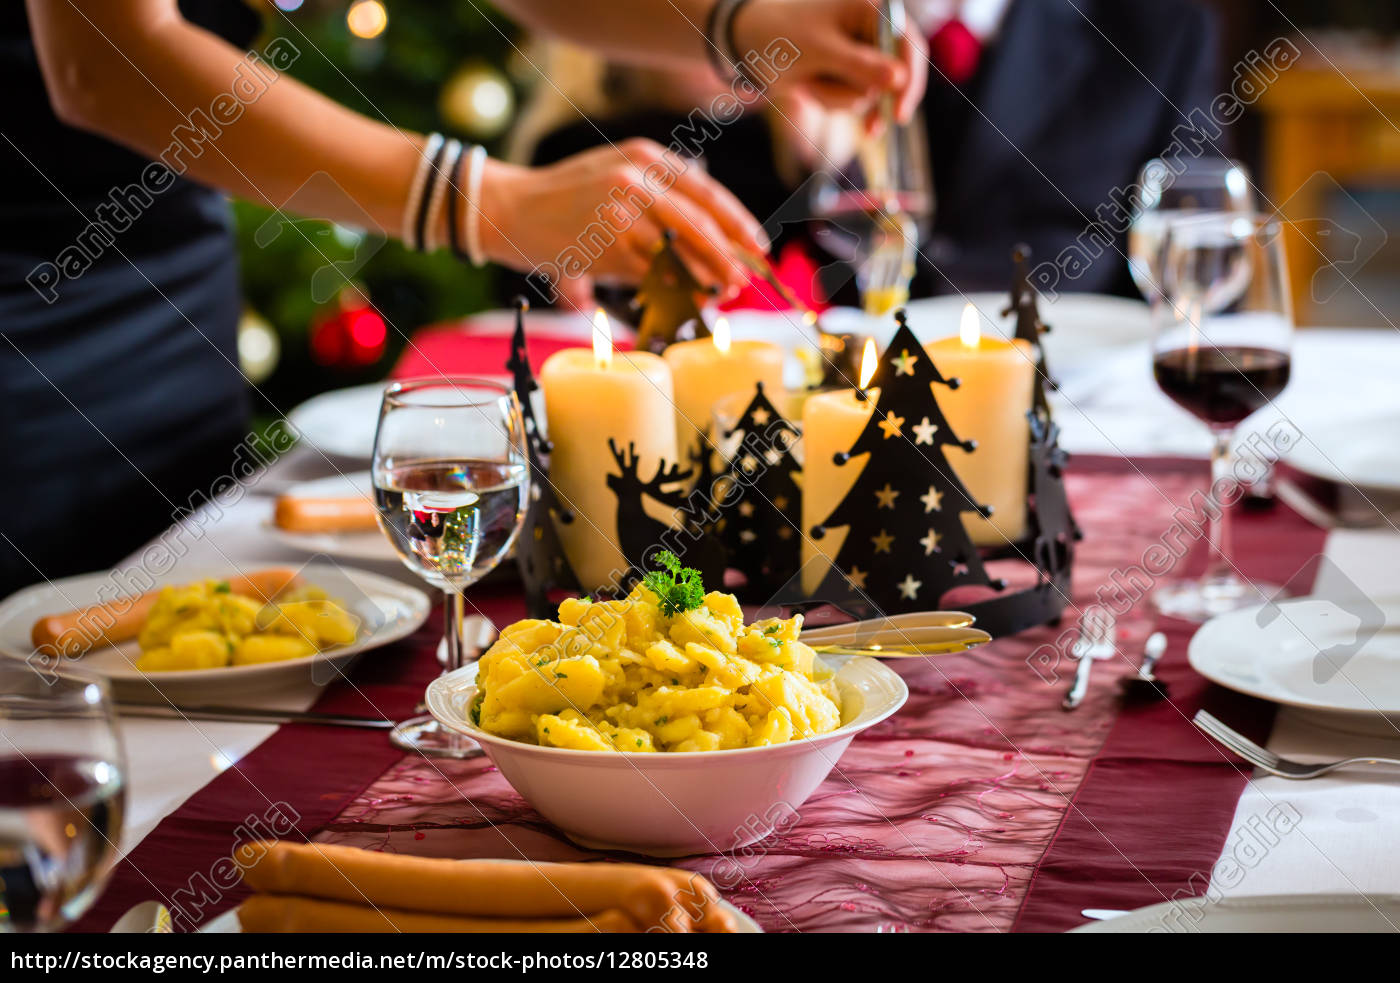 Traditional German Christmas Dinner Sausages And Royalty Free Photo 12805348 Panthermedia Stock Agency